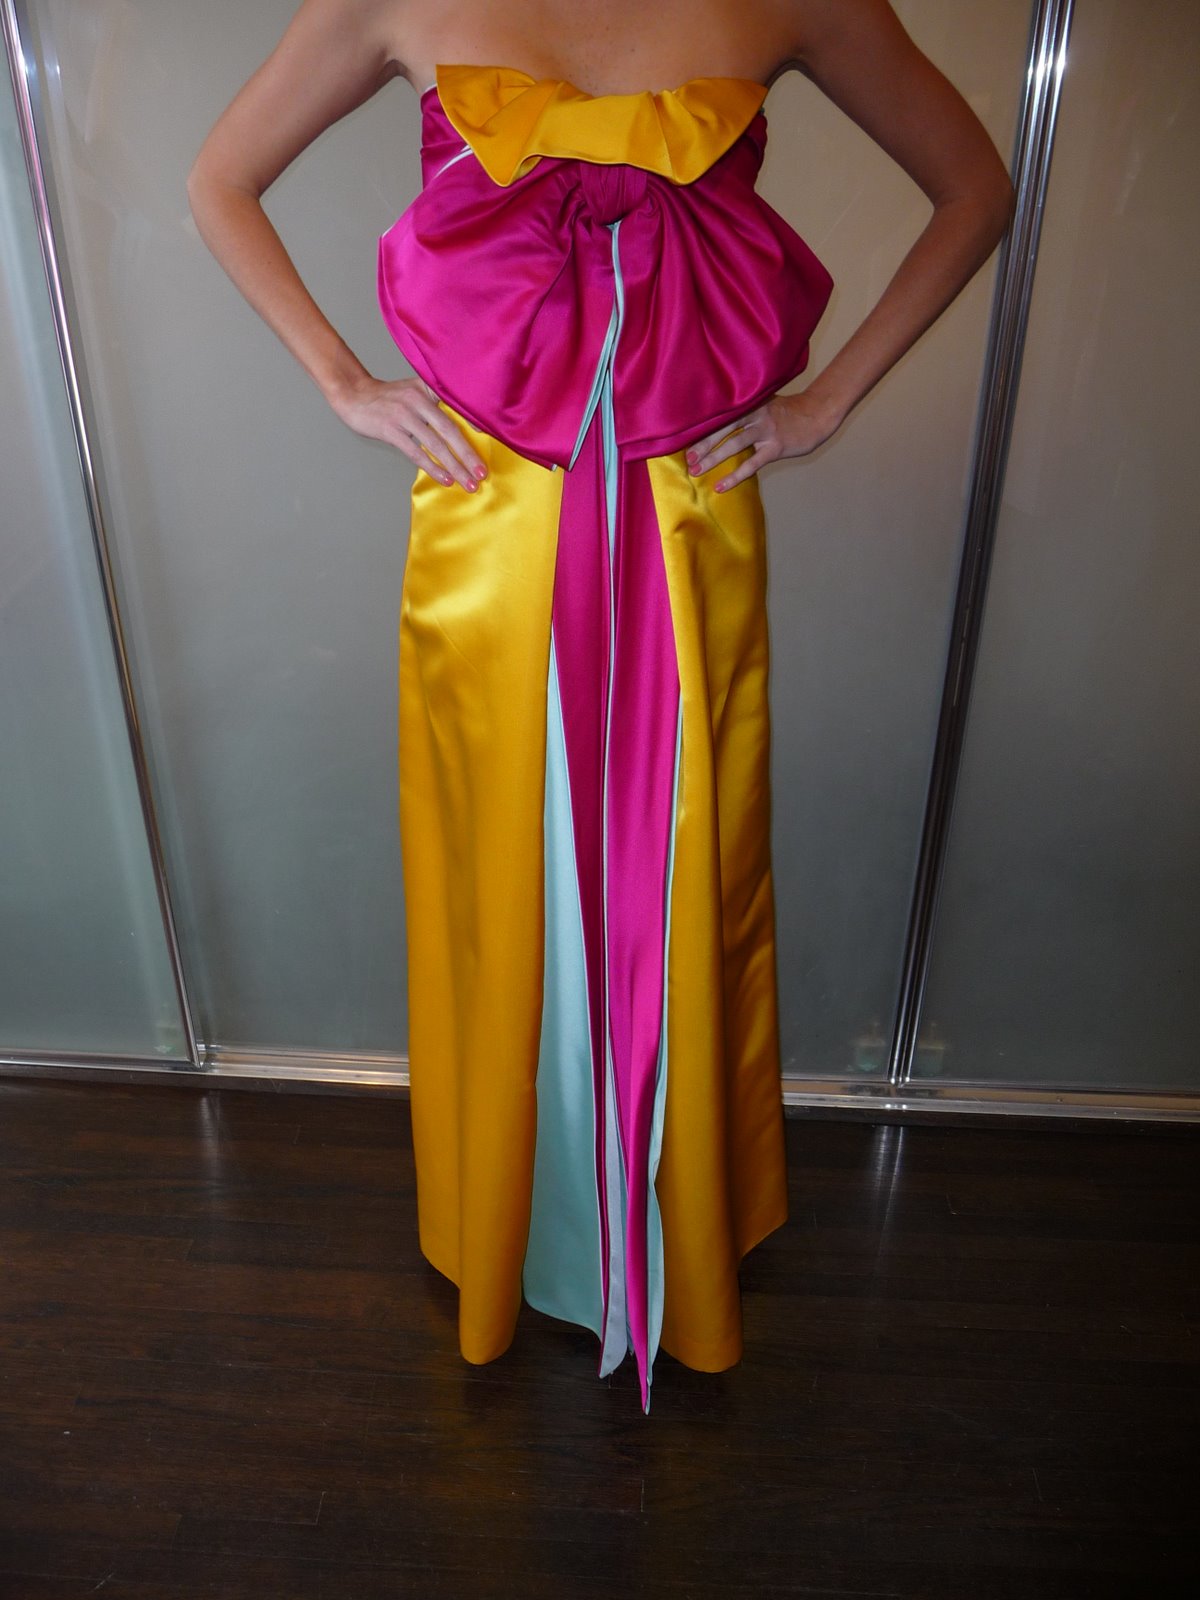 [BILL+BLASS+MARIGOLD+STRAPLESS+GOWN+WITH+HOT+PINK+AND+ICE+BOWNA+ND+CASCADE+C+80S.JPG+(5).JPG]